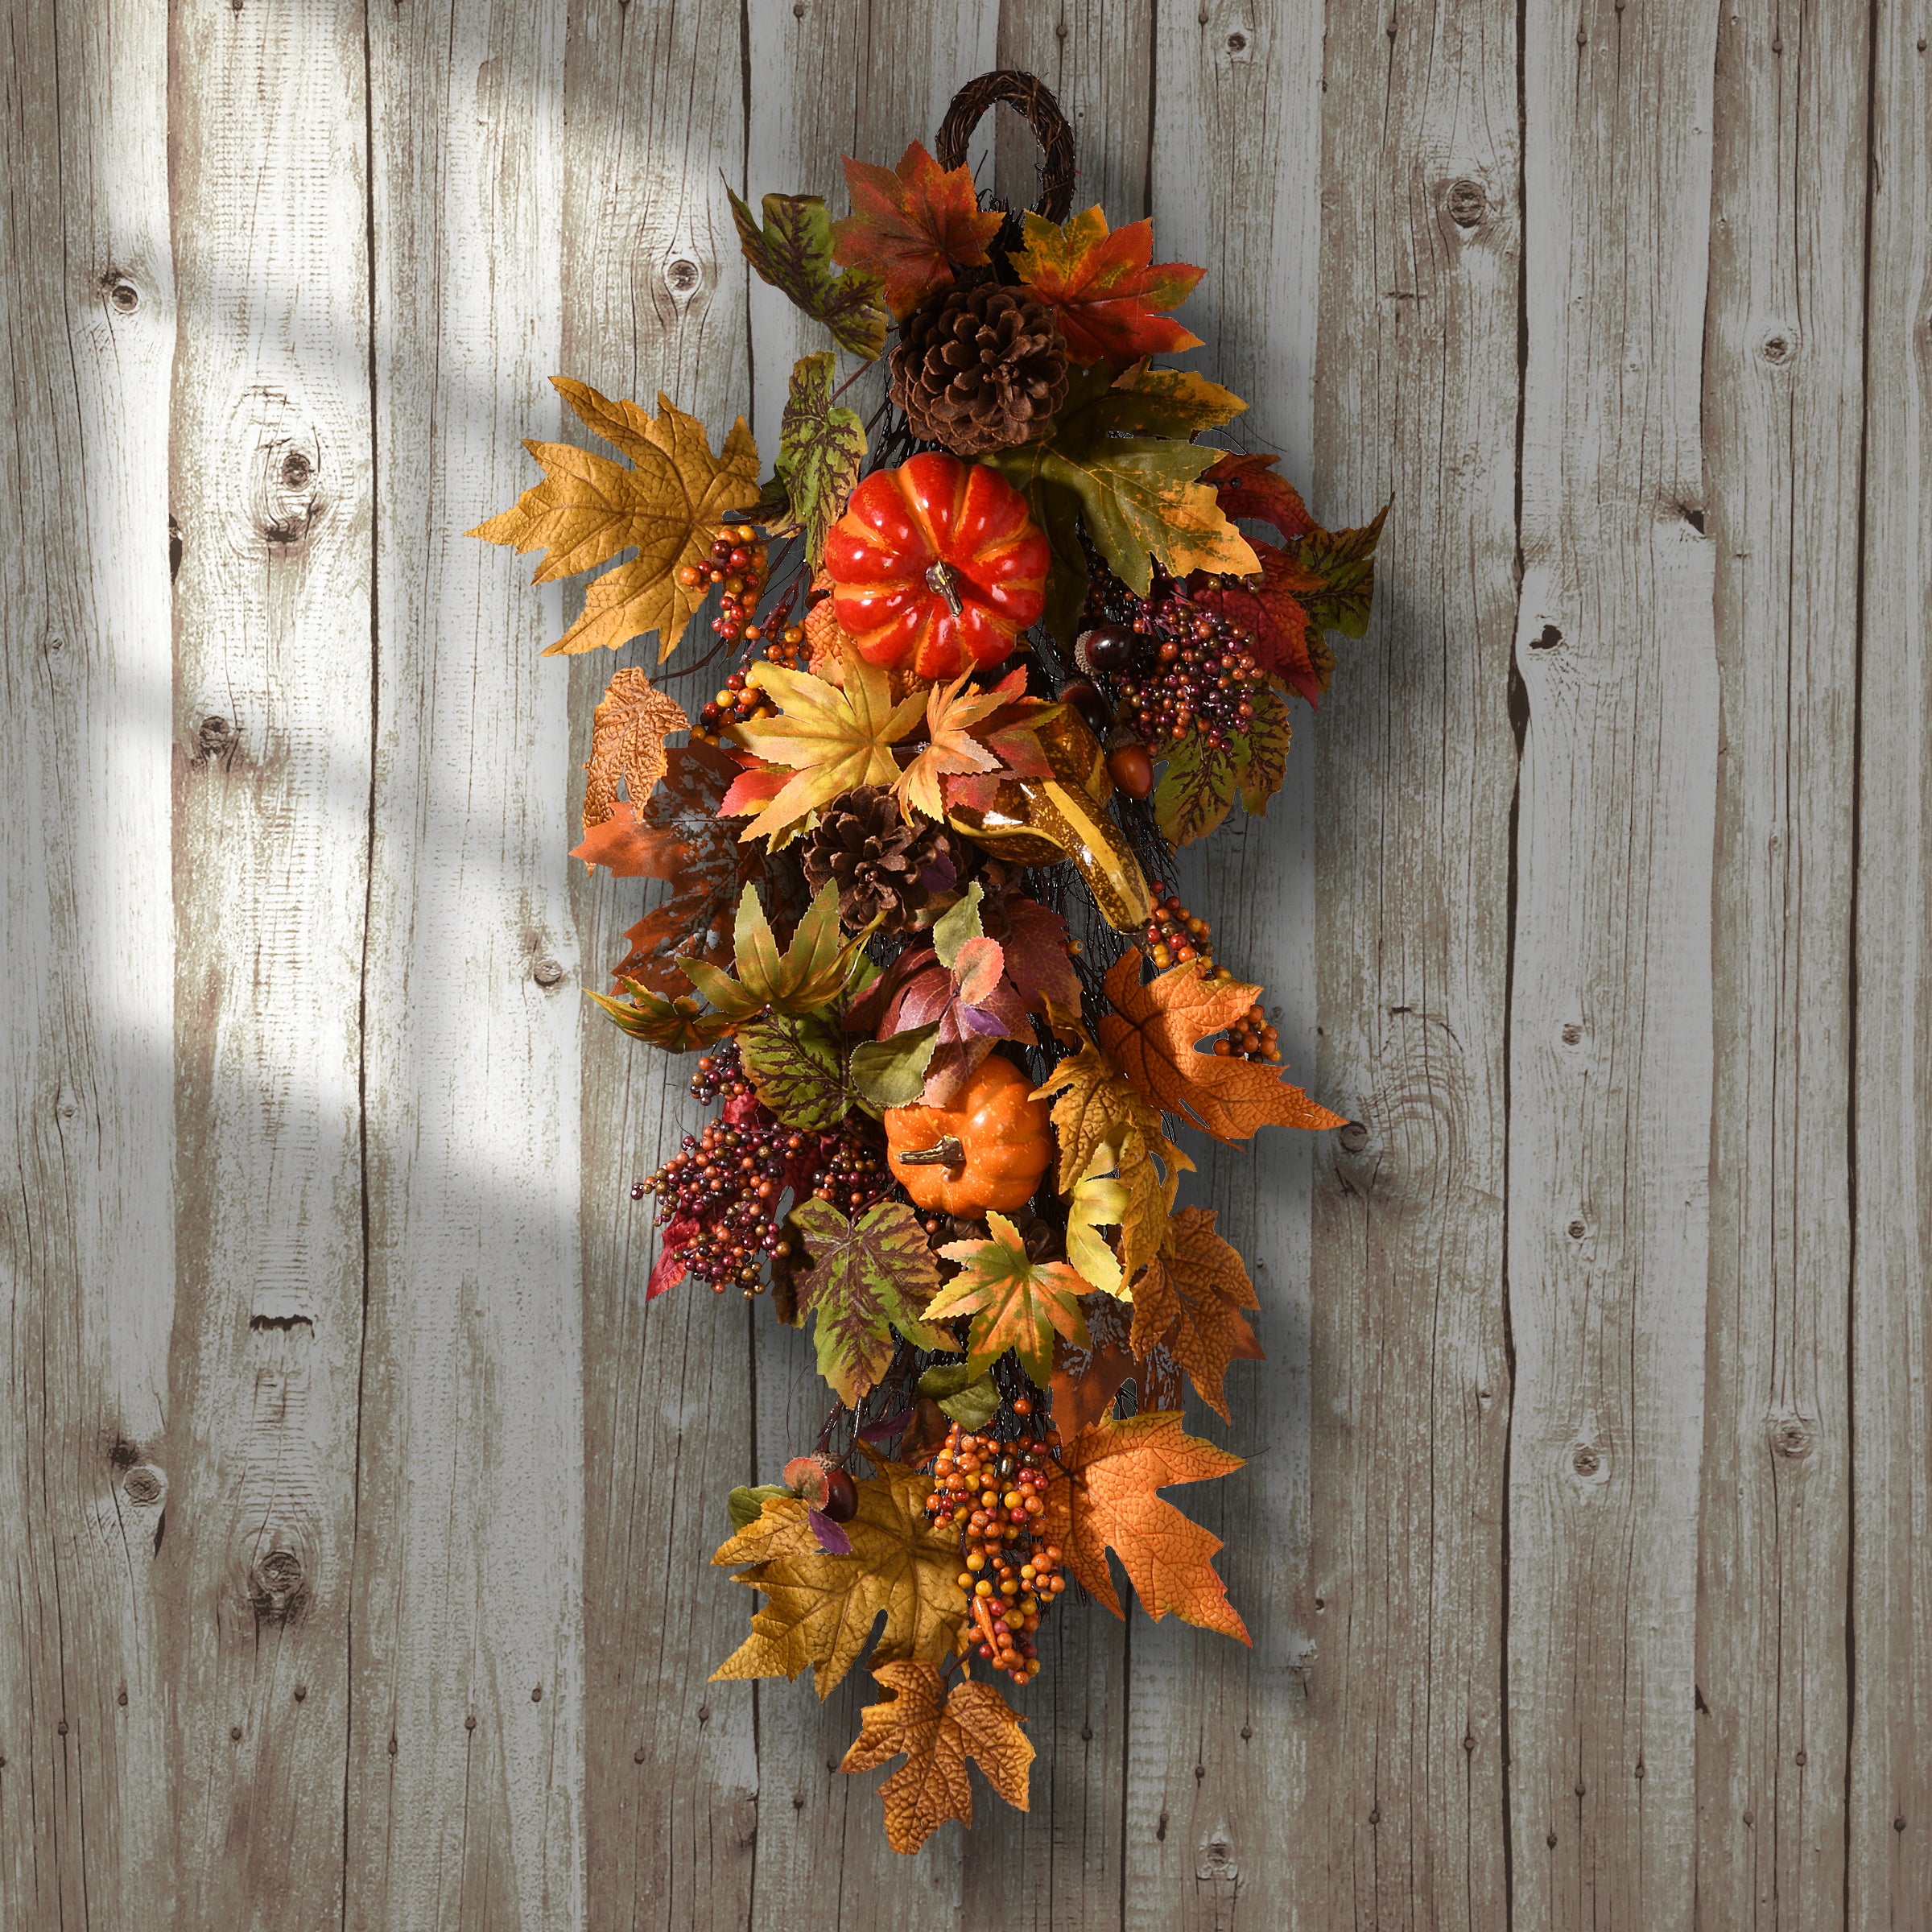 Artificial Fall Teardrop Hanging Wall Decoration, Decorated with Pumpkins, Gourds, Pinecones, Berry Clusters, Maple Leaves, Autumn Collection, 26 in